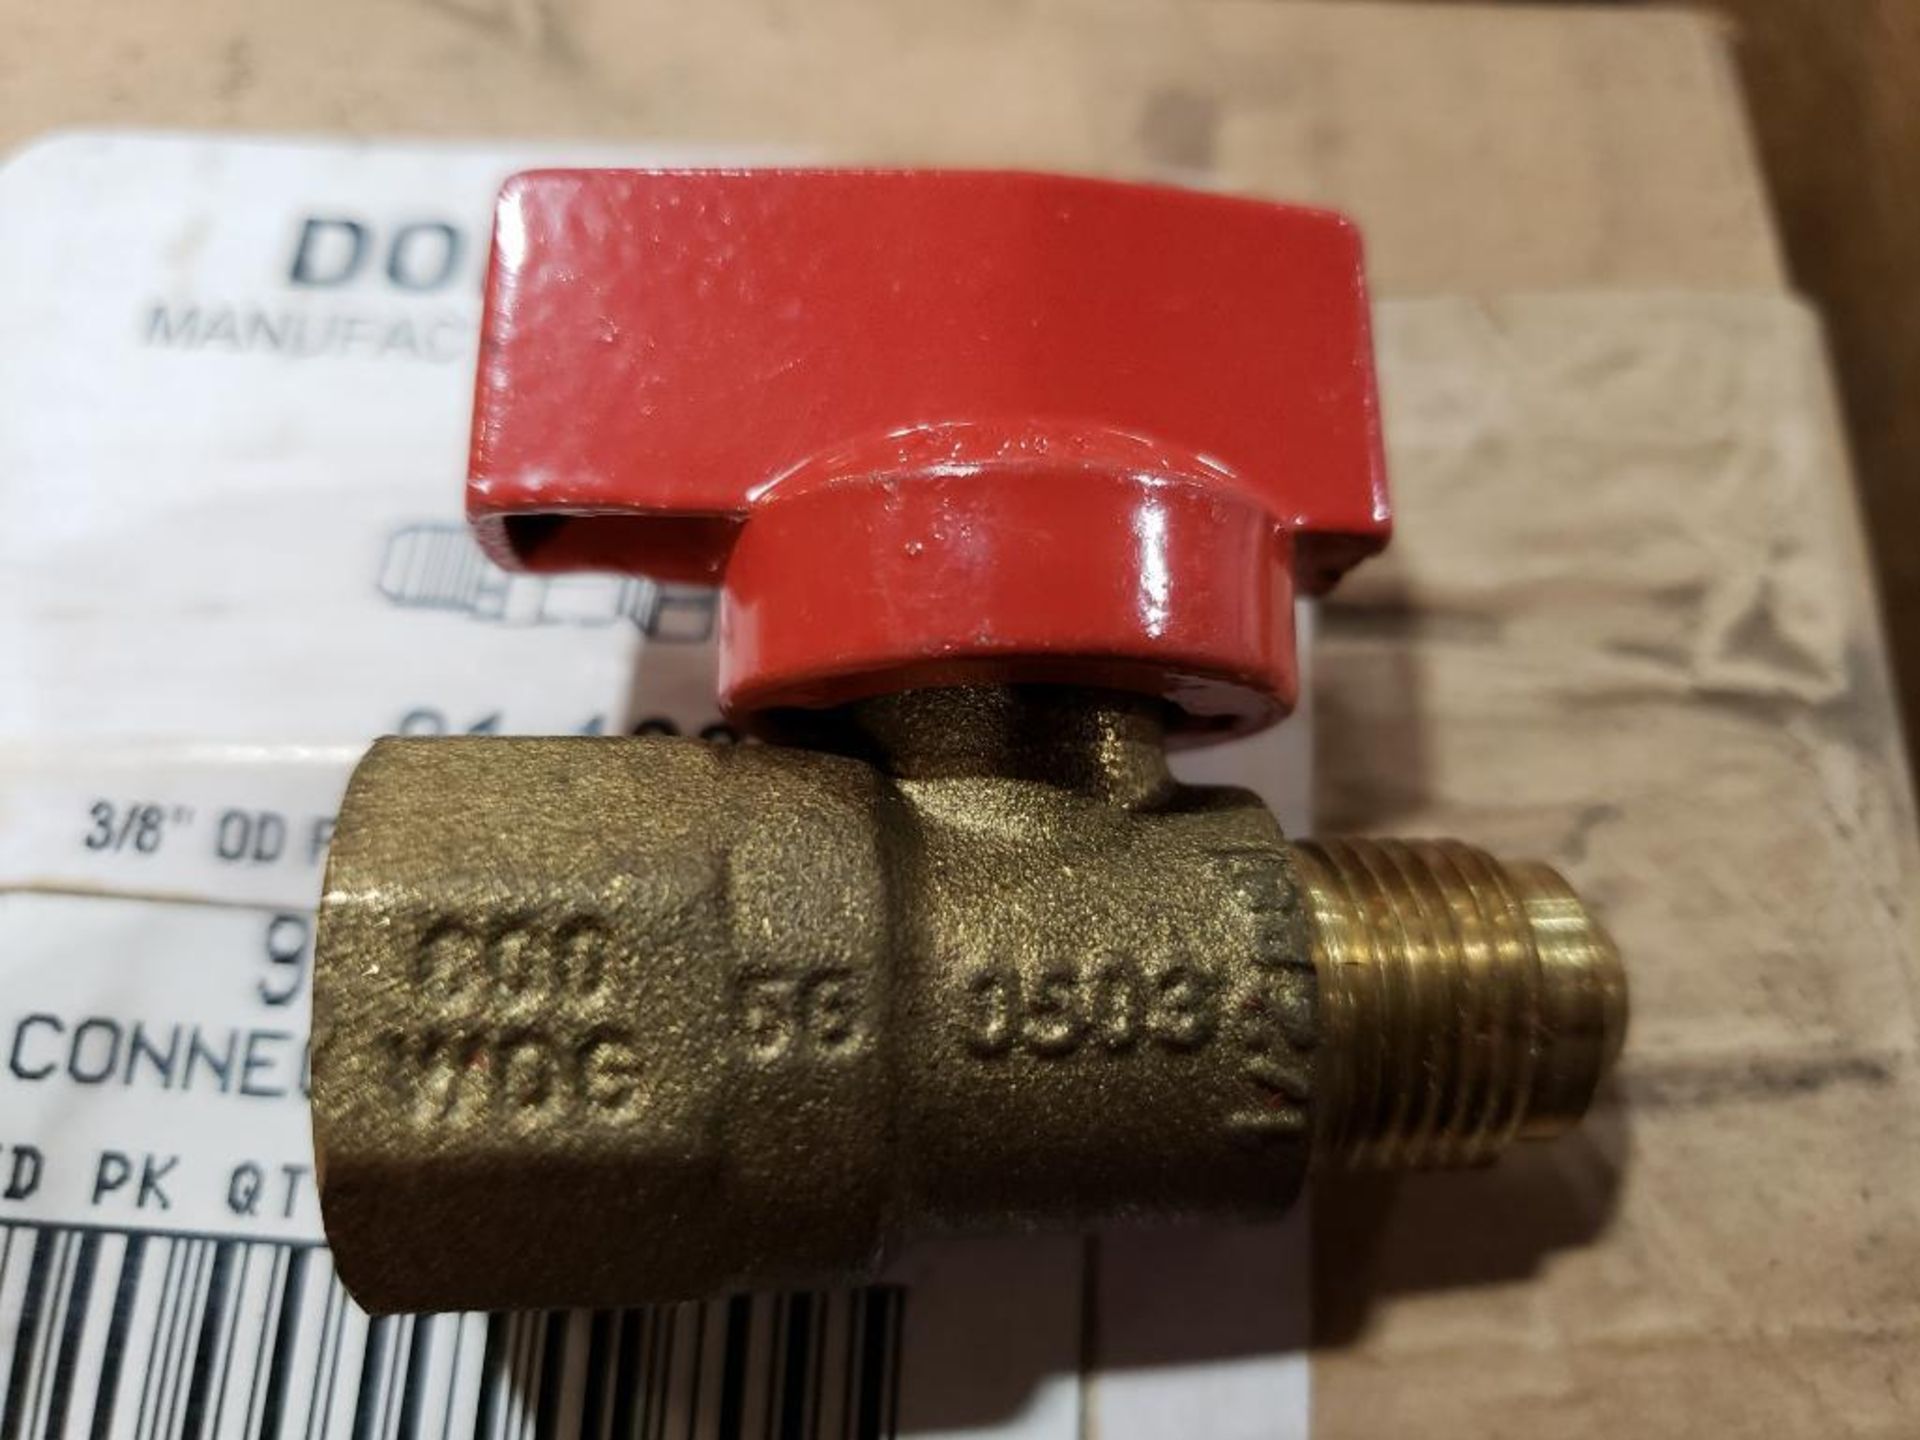 Qty 70 - Dormont brass valves. Part number 91-1032. New in bulk box, 7 boxes of 10. - Image 4 of 4